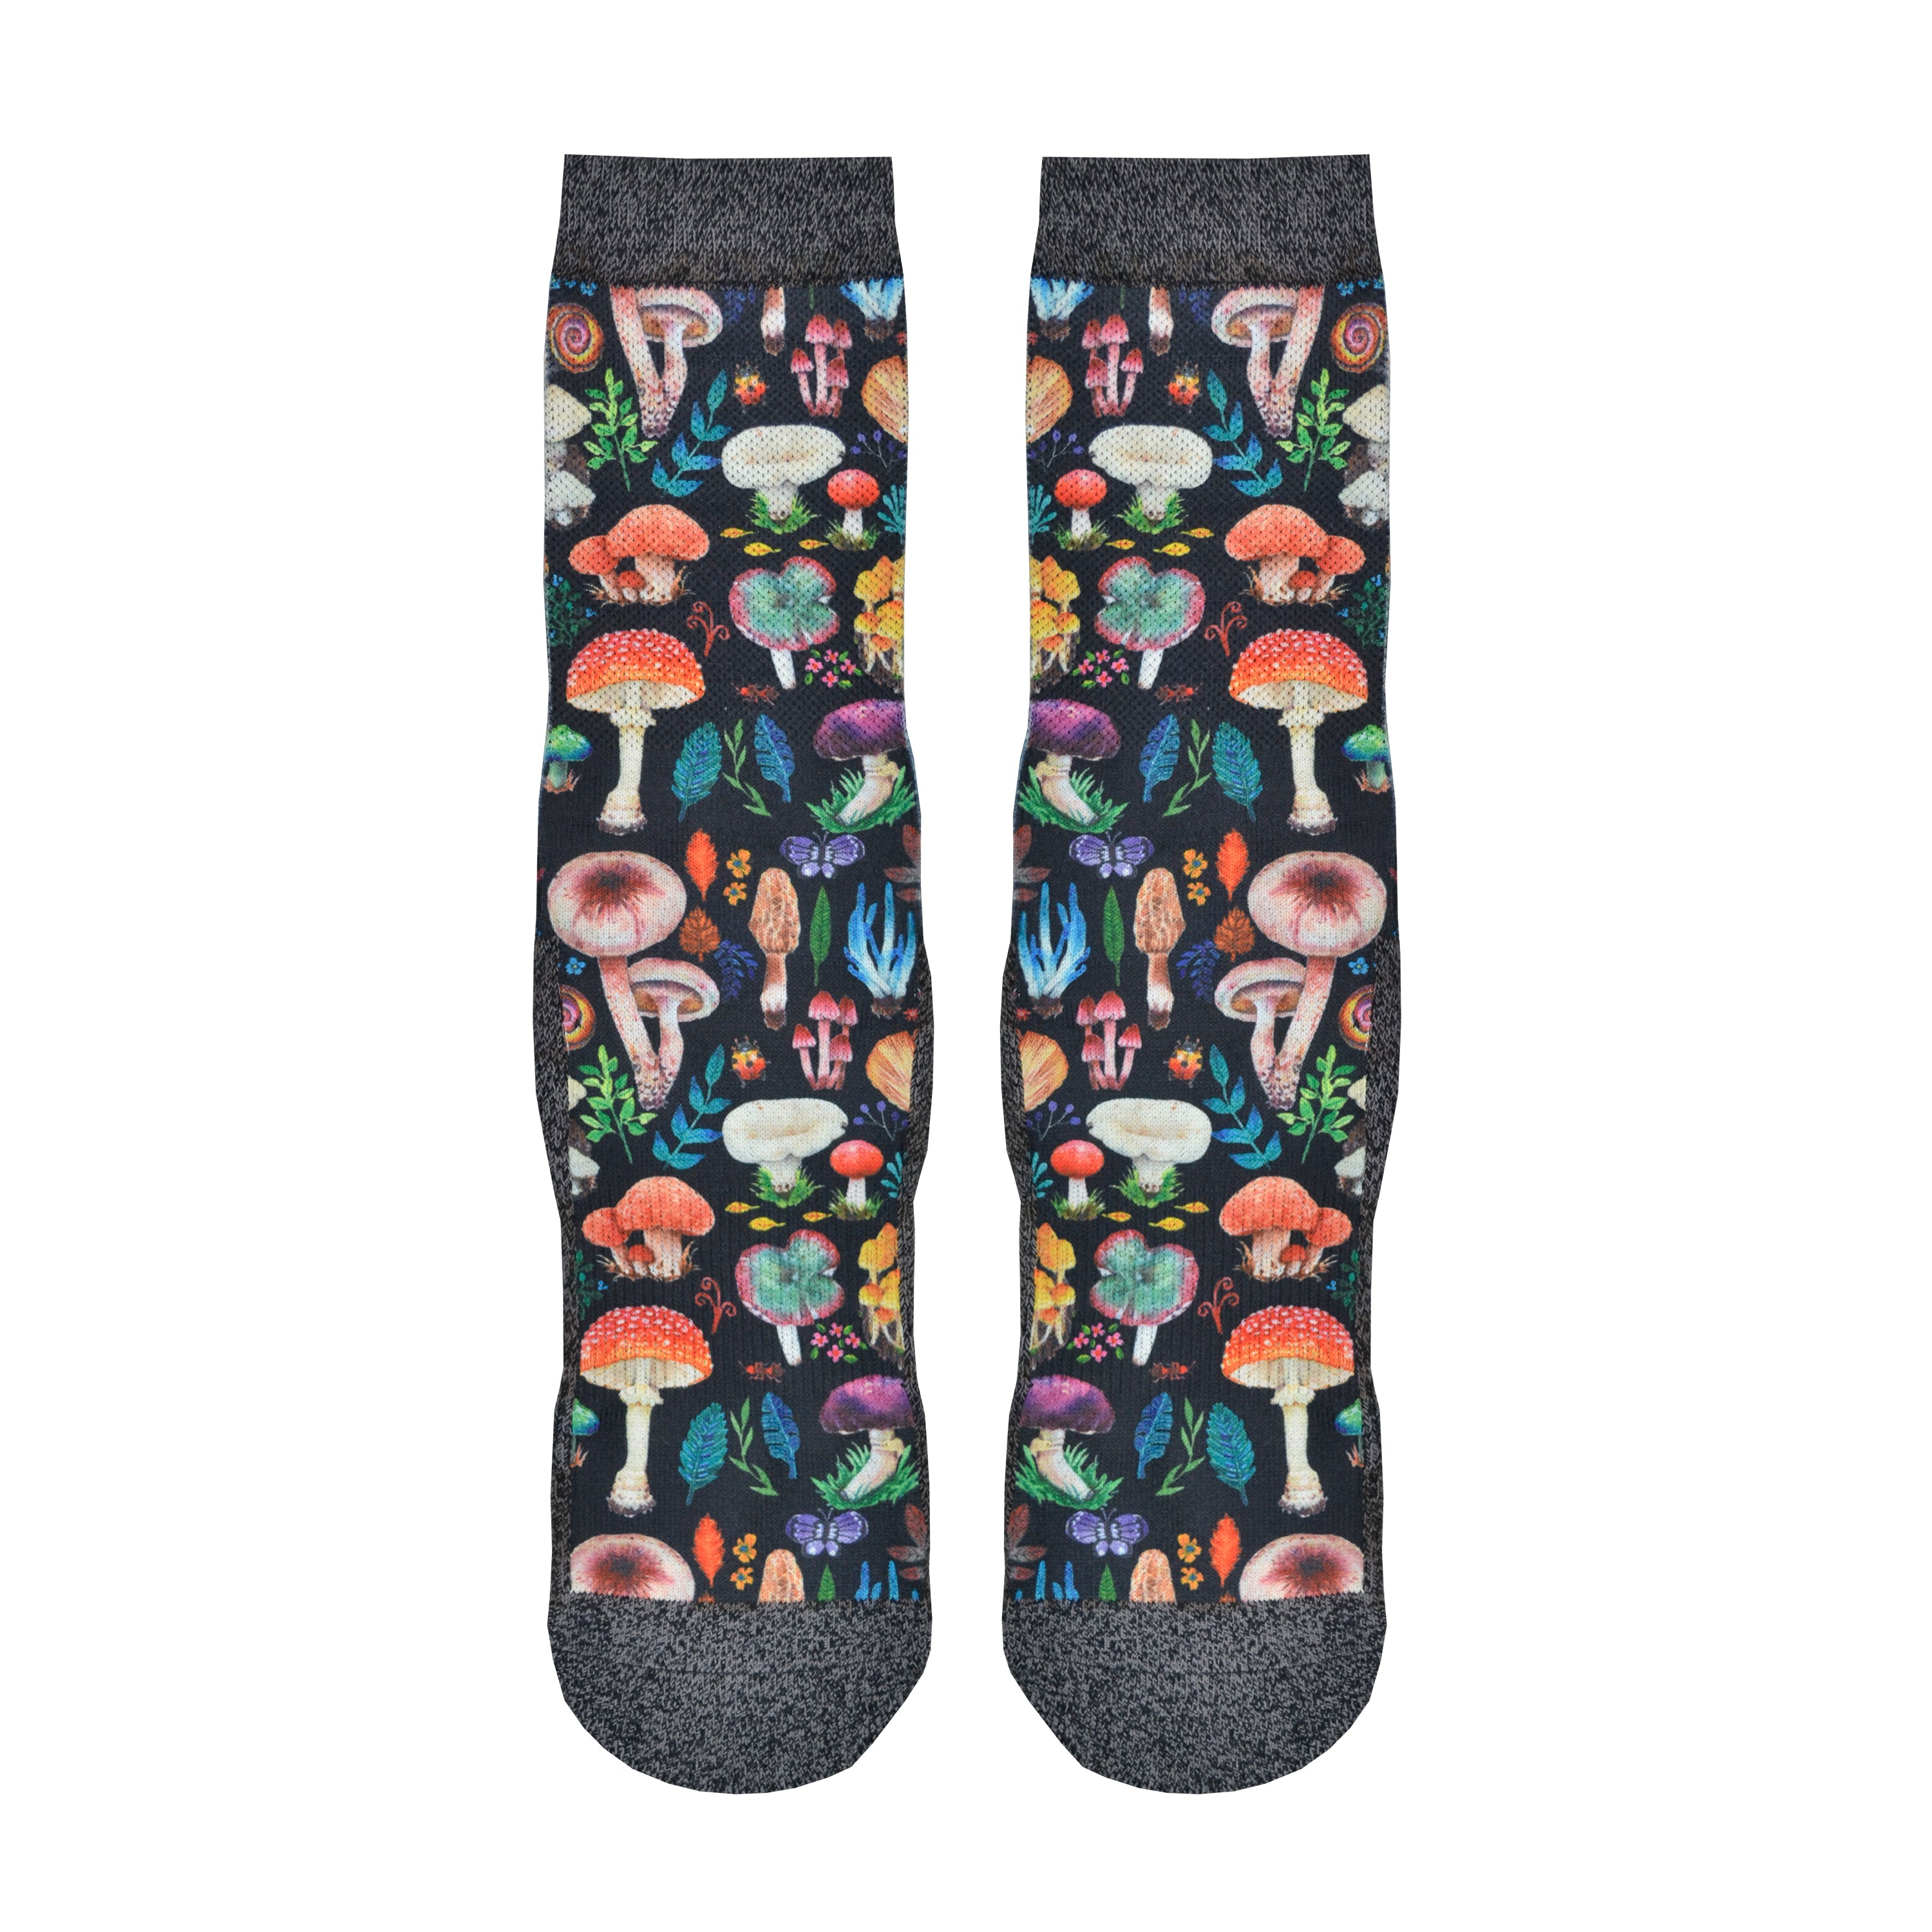 These multi-colored men's polyester crew socks with a black toe and cuff by the brand Good Luck Socks feature all different types of small mushrooms in different colors covering the leg and foot.